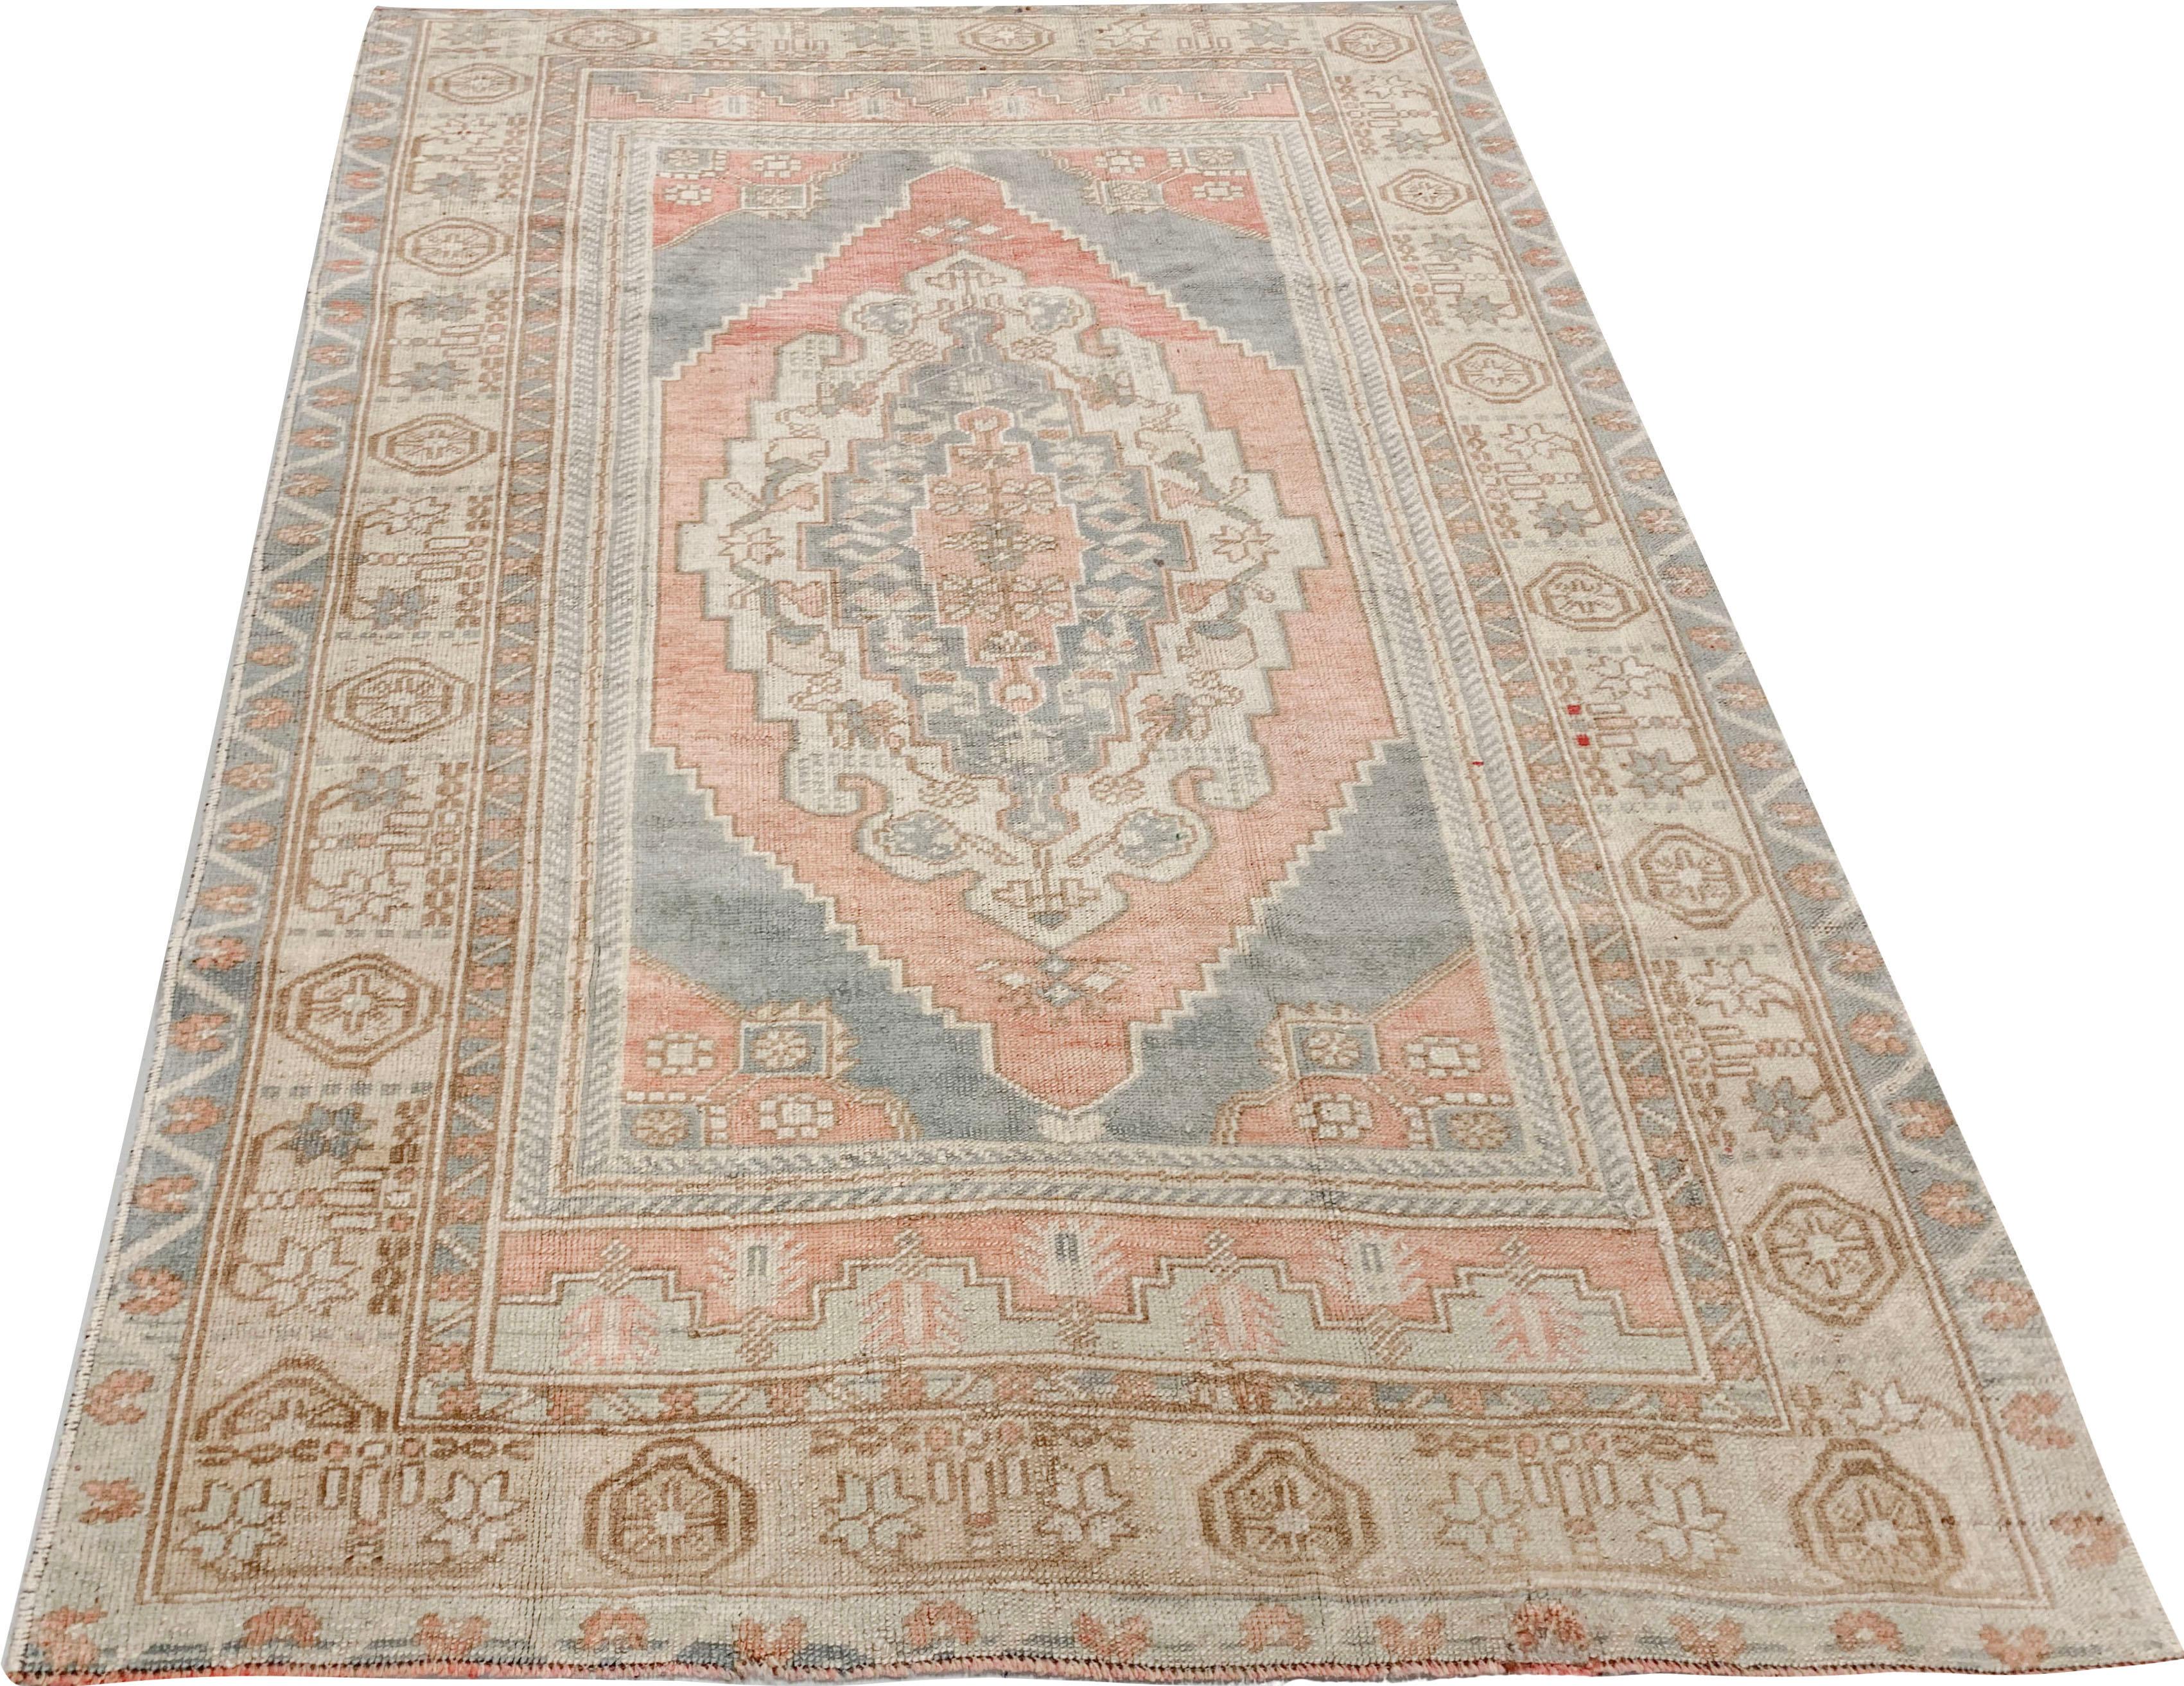 Vintage Turkish Oushak rug 3'10 x 5'6. Light colored Oushaks are among the most popular oriental carpets, known for the high quality of their wool their beautiful patterns and warm colors. These designer favorites will complement any interior.